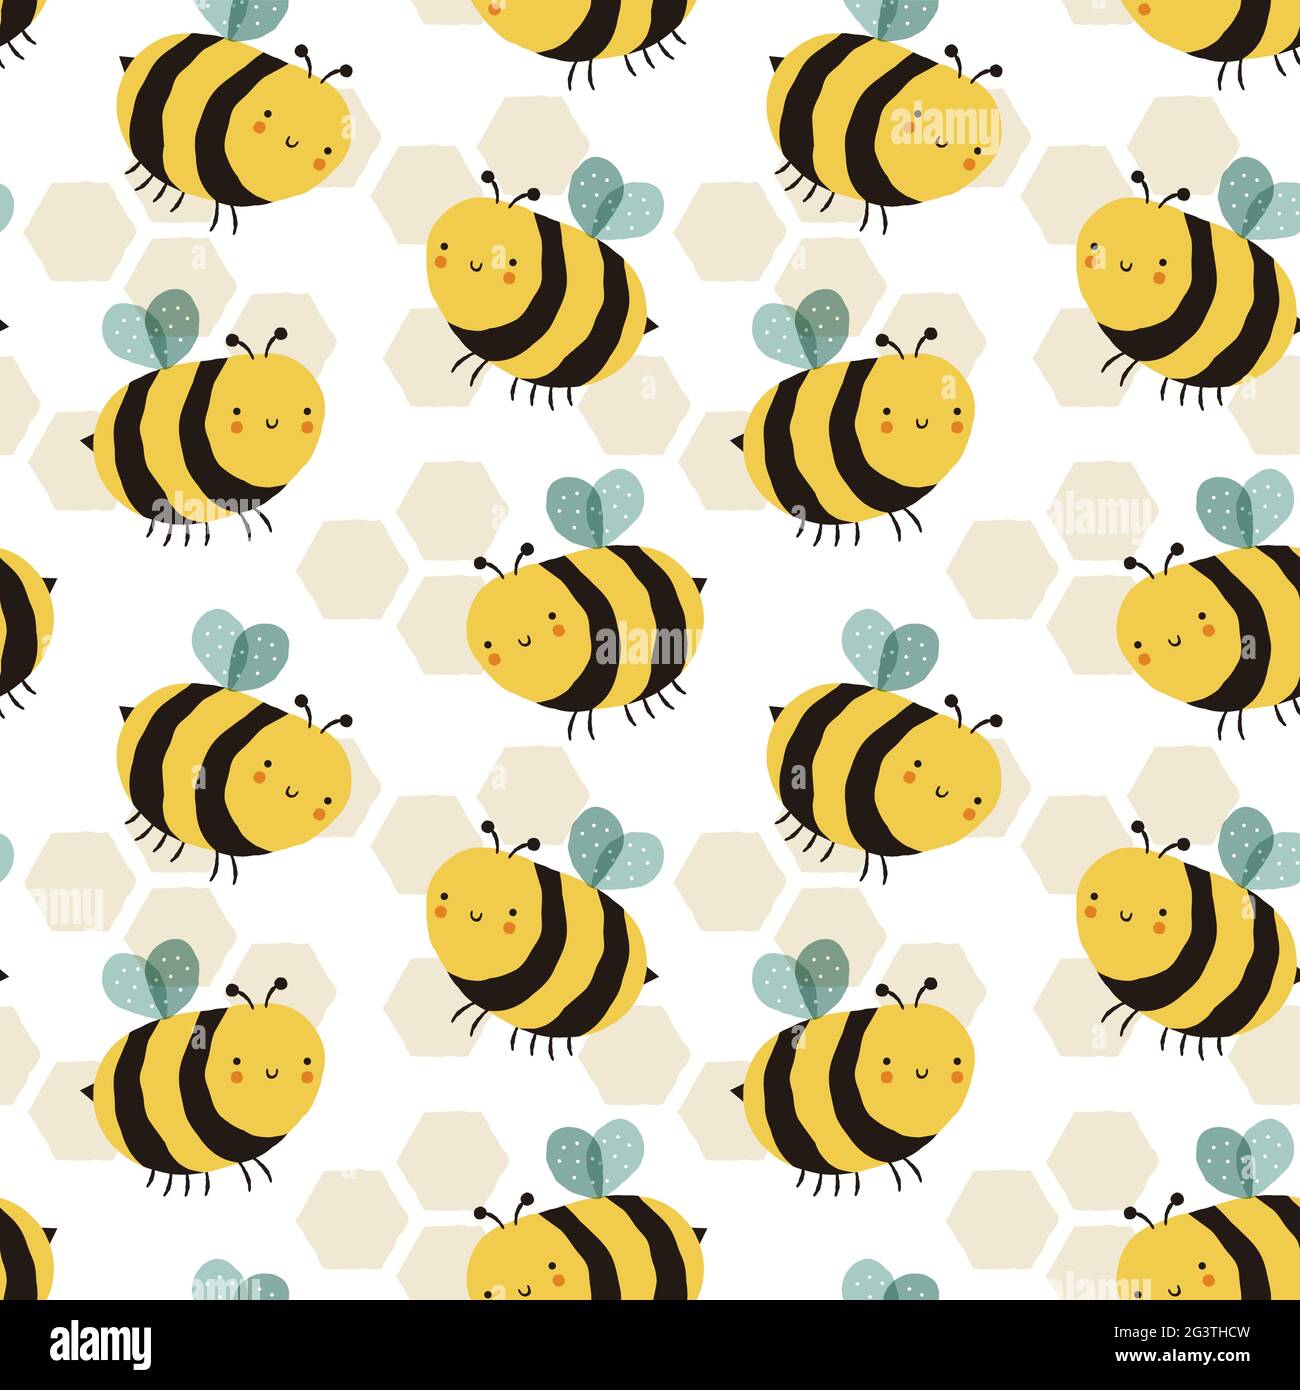 Funny bee doodle cartoon seamless pattern illustration with cute bumblebee character on isolated beehive backdrop. Childish hand drawn bees background Stock Vector